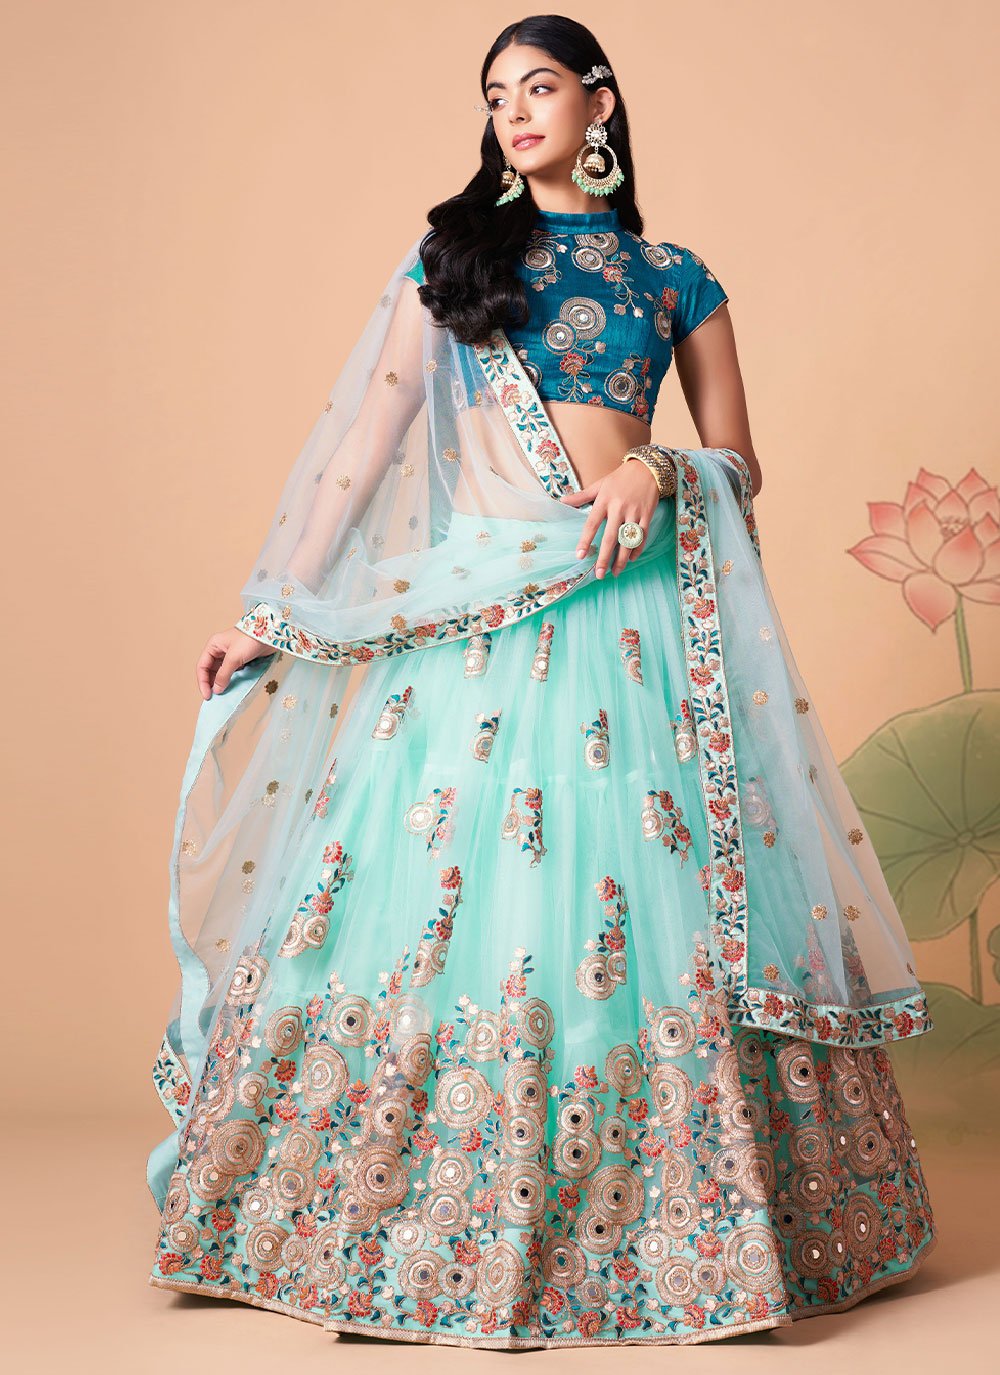 Shop Ghagra Choli Design for Women Online from India's Luxury Designers 2023